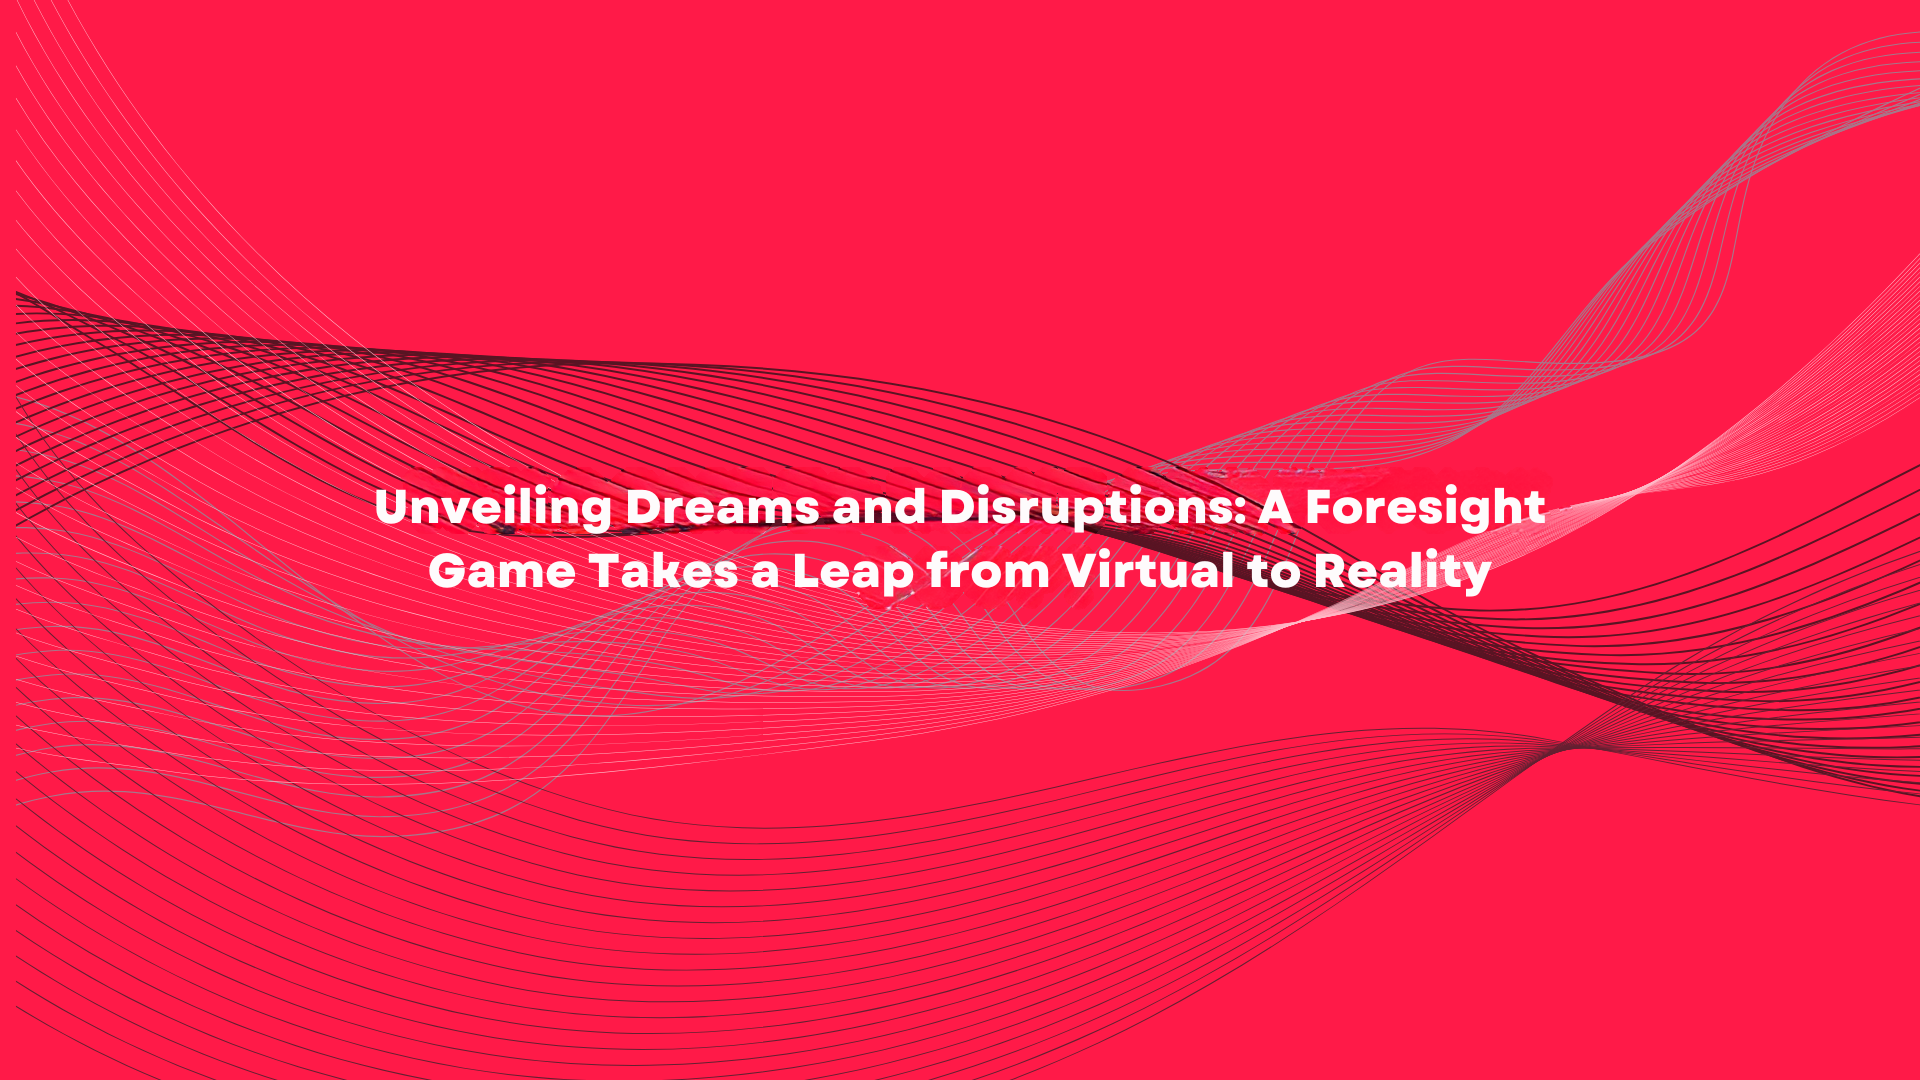 Unveiling Dreams and Disruptions: A Foresight Game Takes a Leap from Virtual to Reality